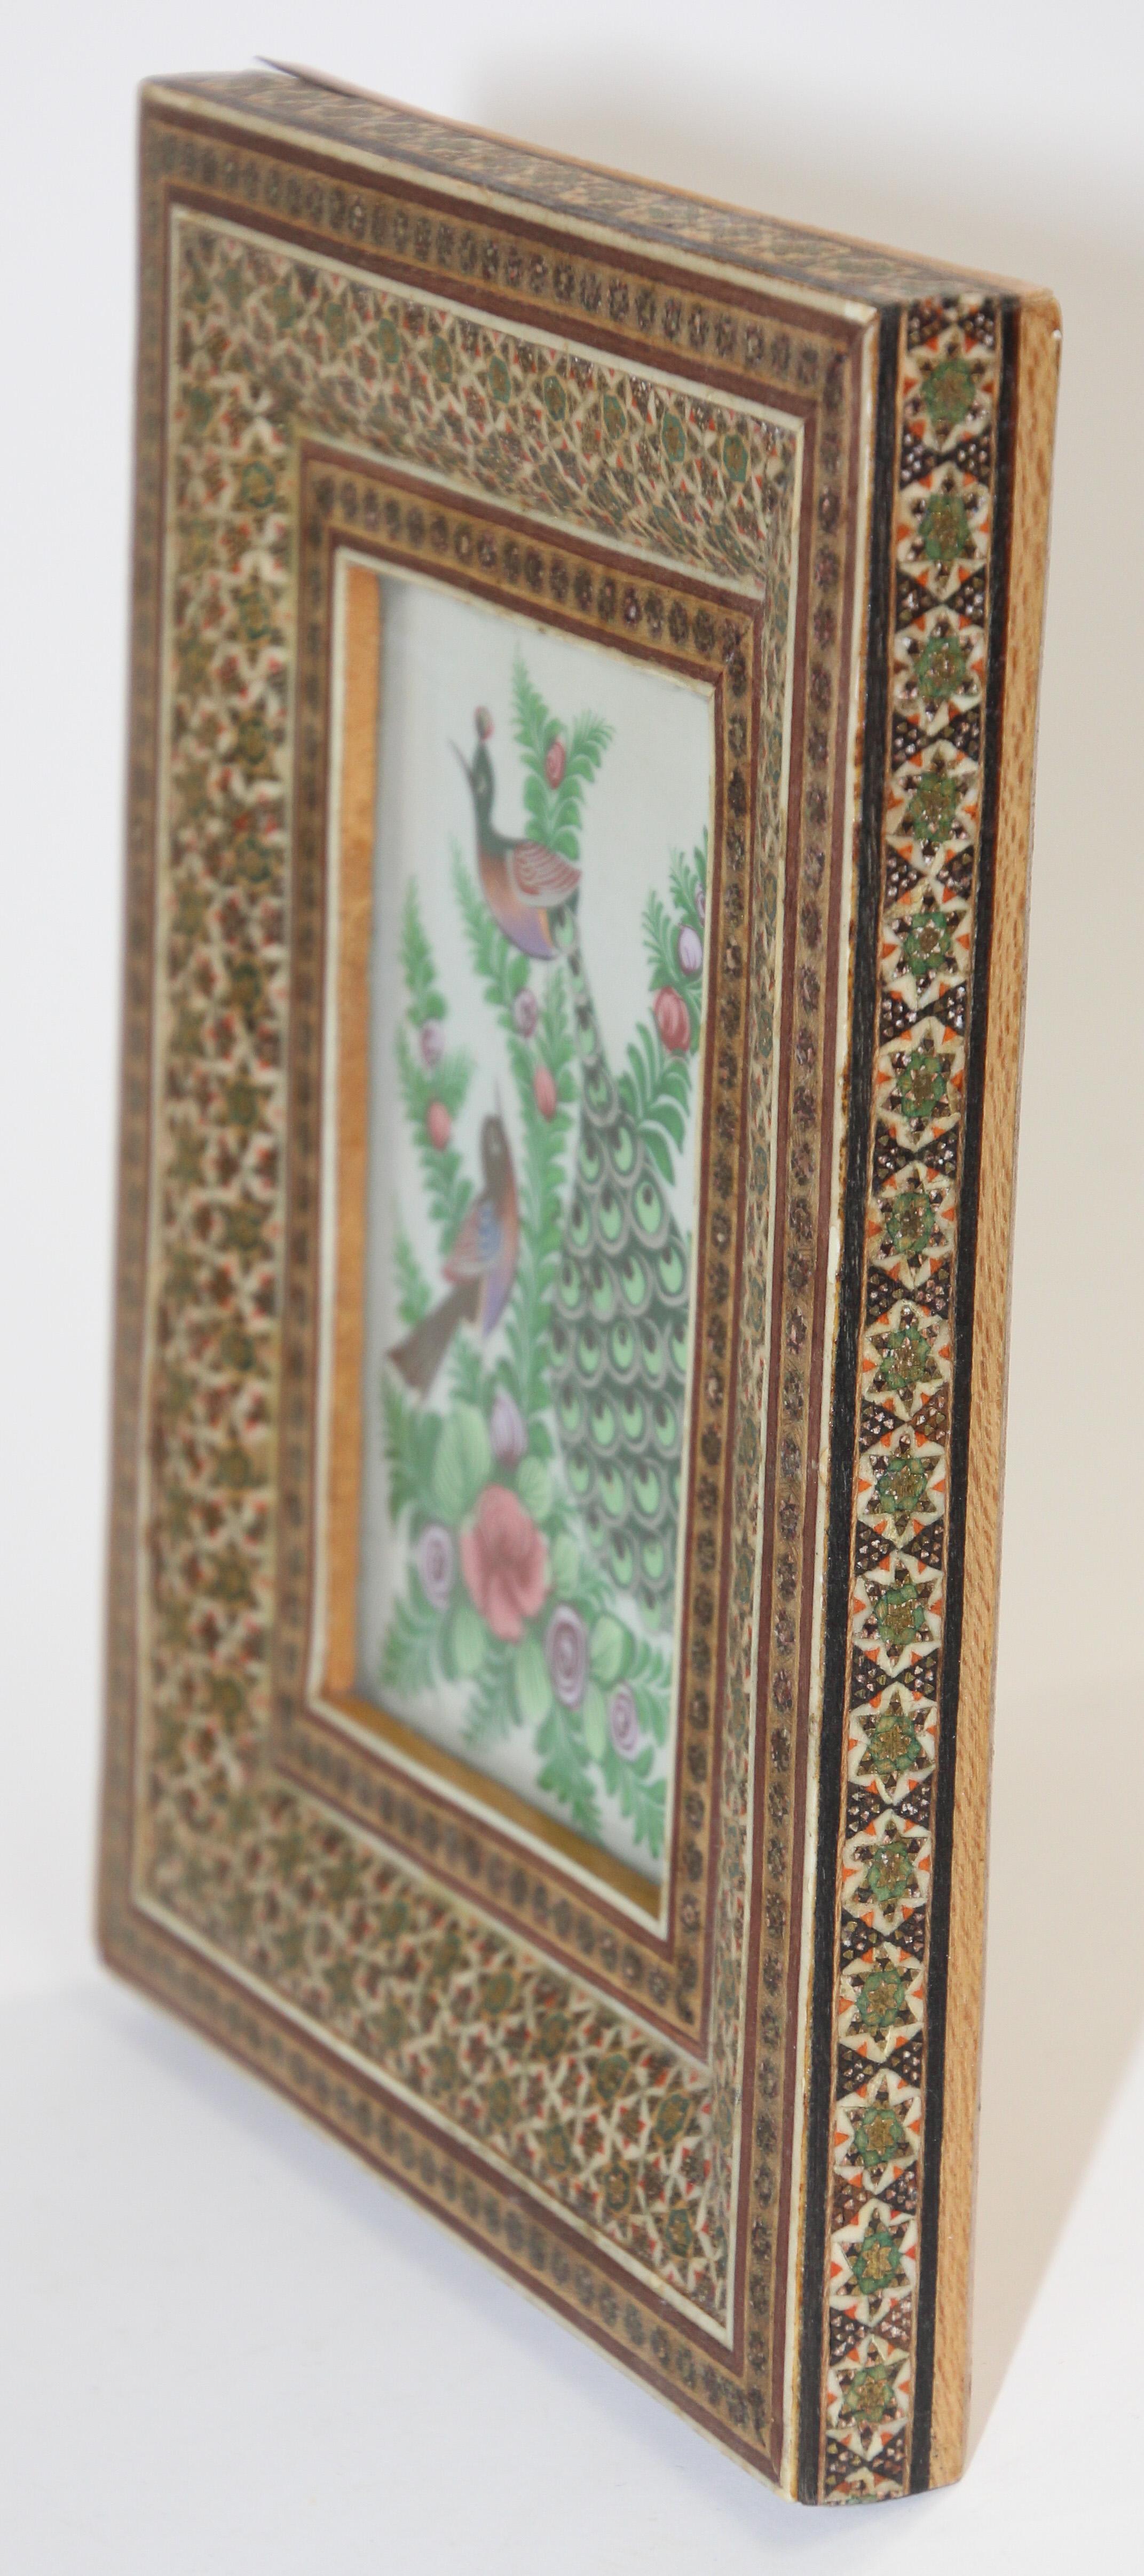 Middle Eastern Miniature Painting of Peacocks in Mosaic Frame In Good Condition For Sale In North Hollywood, CA